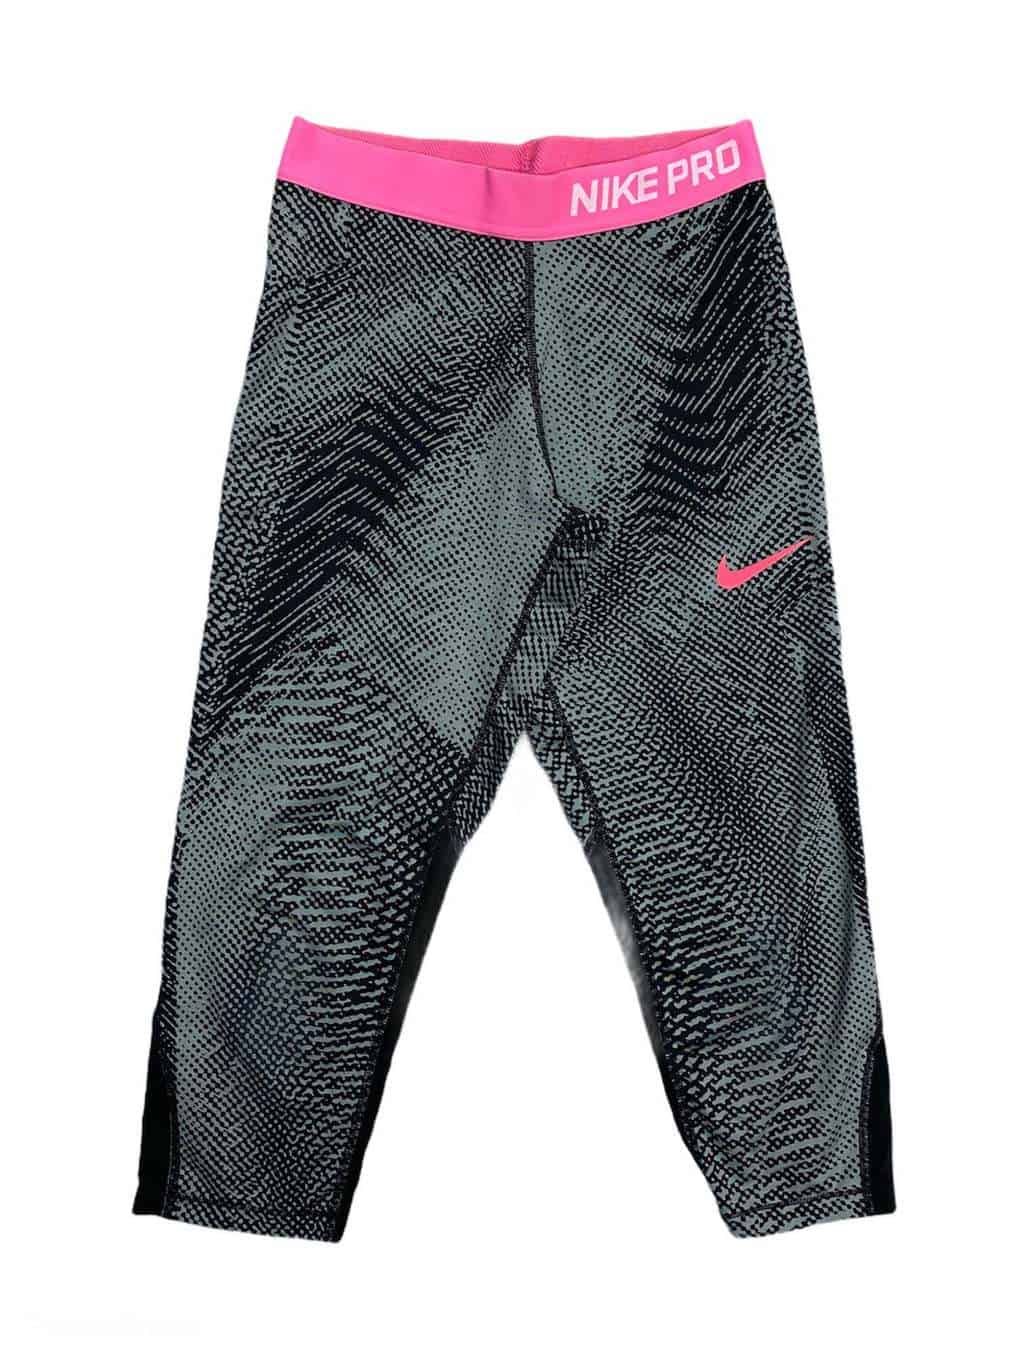 Rusland Ældre borgere plejeforældre Women's NIKE Pro 3/4 Length Leggings with Pink Waistband and Abstract Grey  and Black Motif - XS / S - St Cyr Vintage